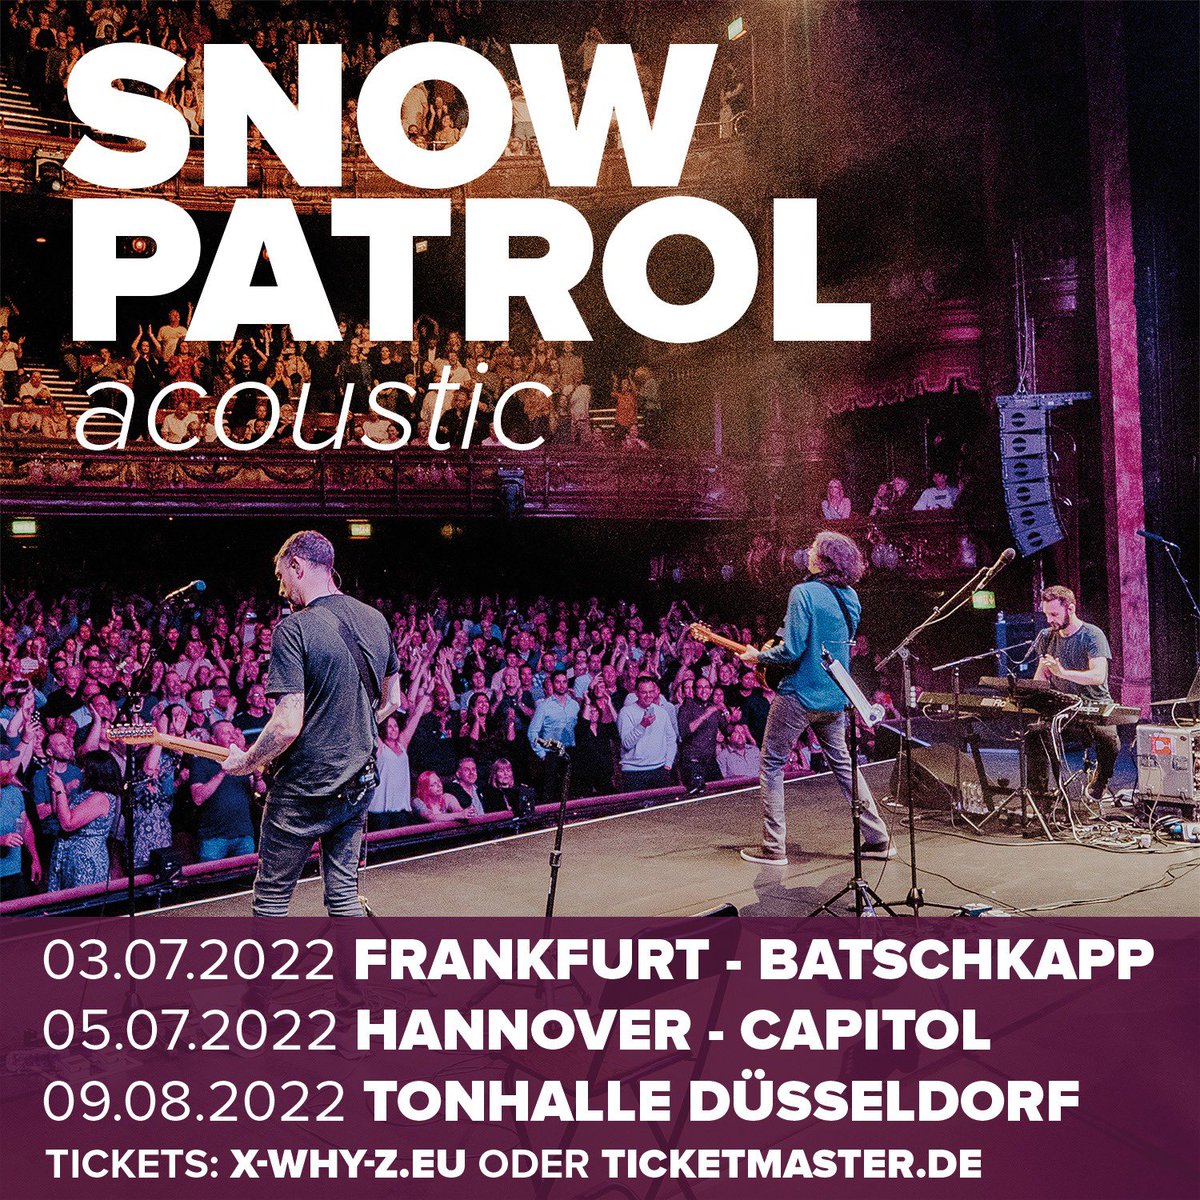 We are so excited to be heading to Germany for a few acoustic shows this summer. Tickets on sale this Friday, March 25th at 10am CET. Hope to see you there! SPx